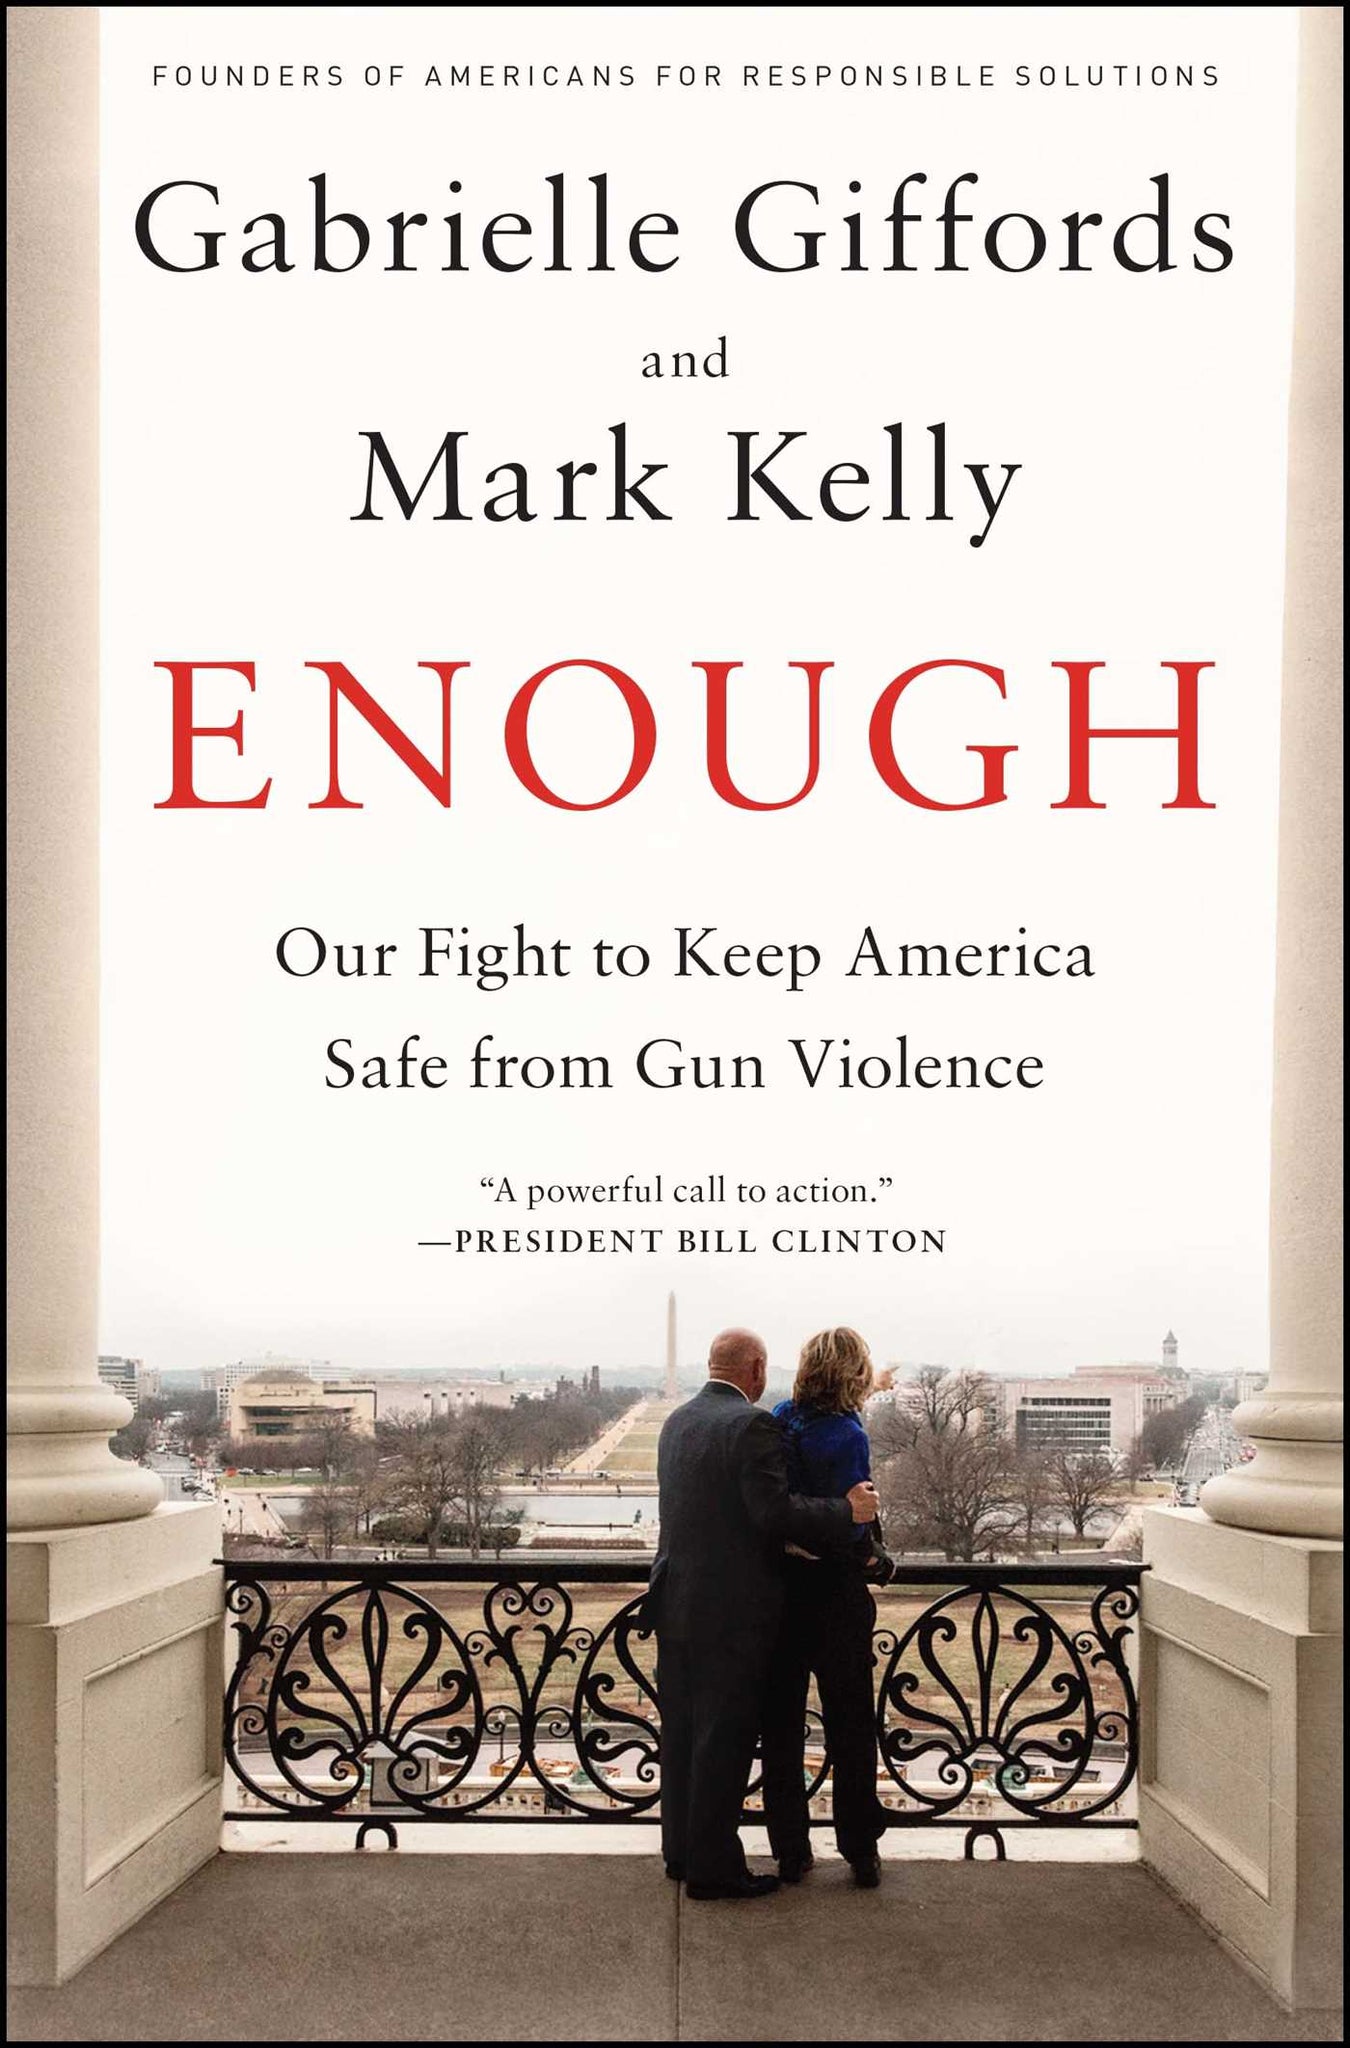 Enough : Our Fight to Keep America Safe from Gun Violence